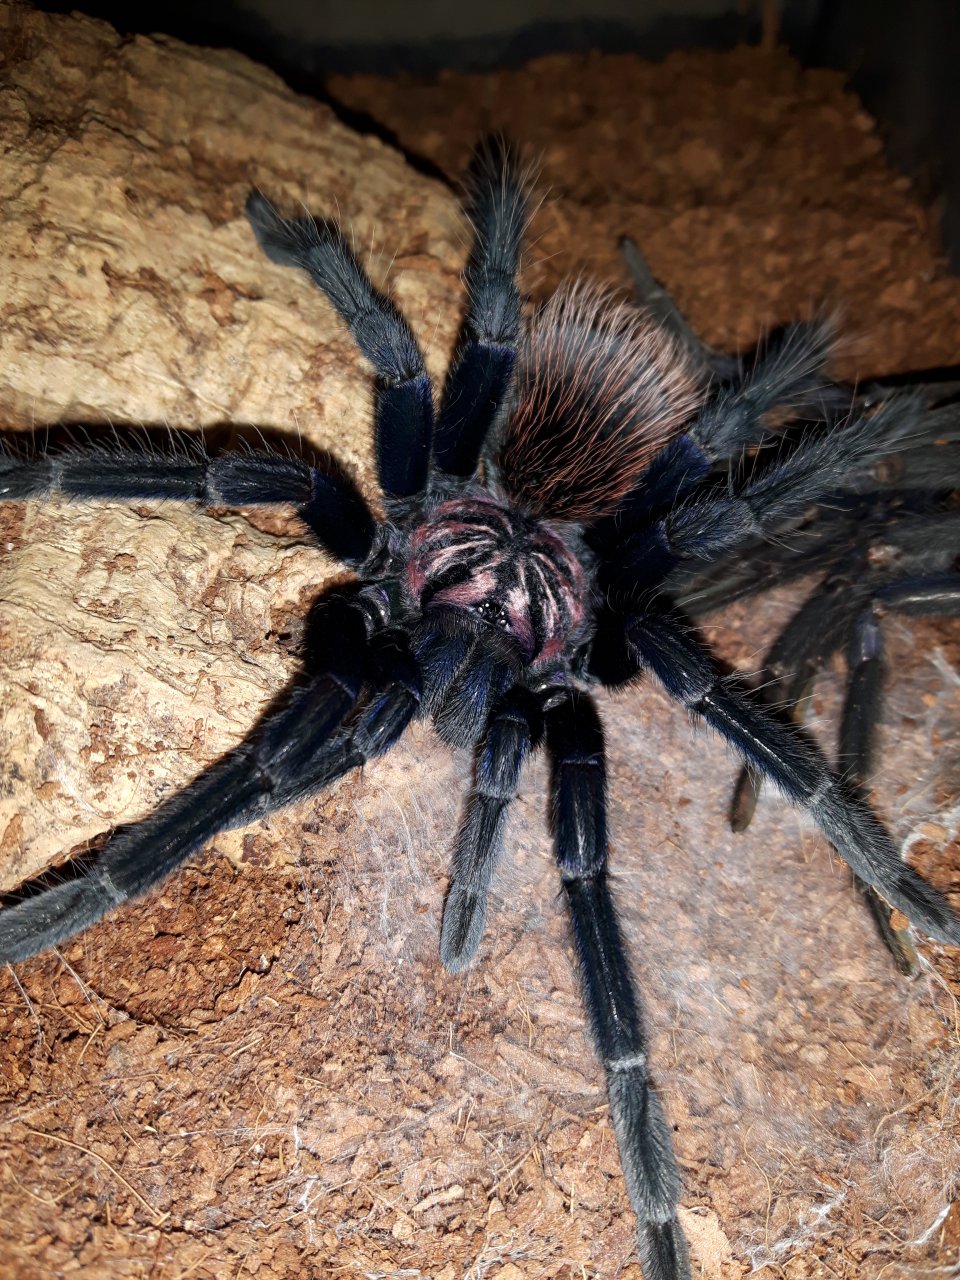 Xenesthis sp. blue Colombia